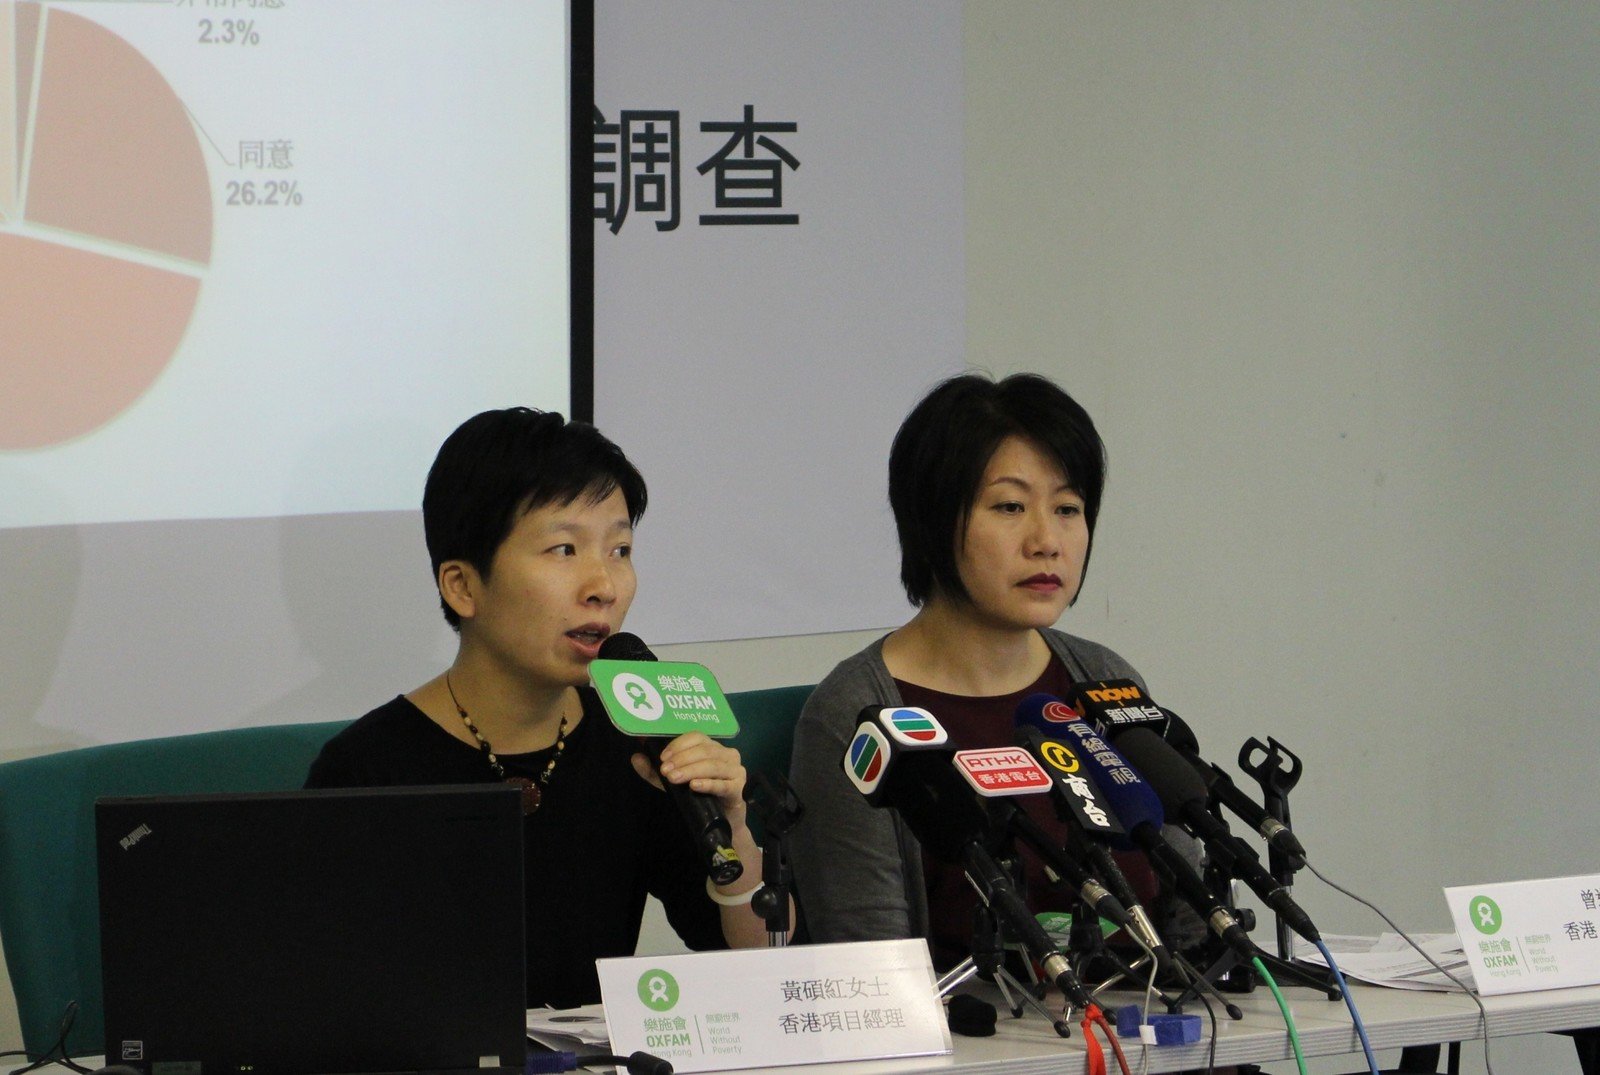 Wong Shek-hung, Oxfam’s Hong Kong Programme Manager (left), and Kalina Tsang, Head of Oxfam’s Hong Kong, Macau, Taiwan Programme (right), announcing the release of Oxfam’s latest report. It reveals grave concern among the Hong Kong public towards poverty.